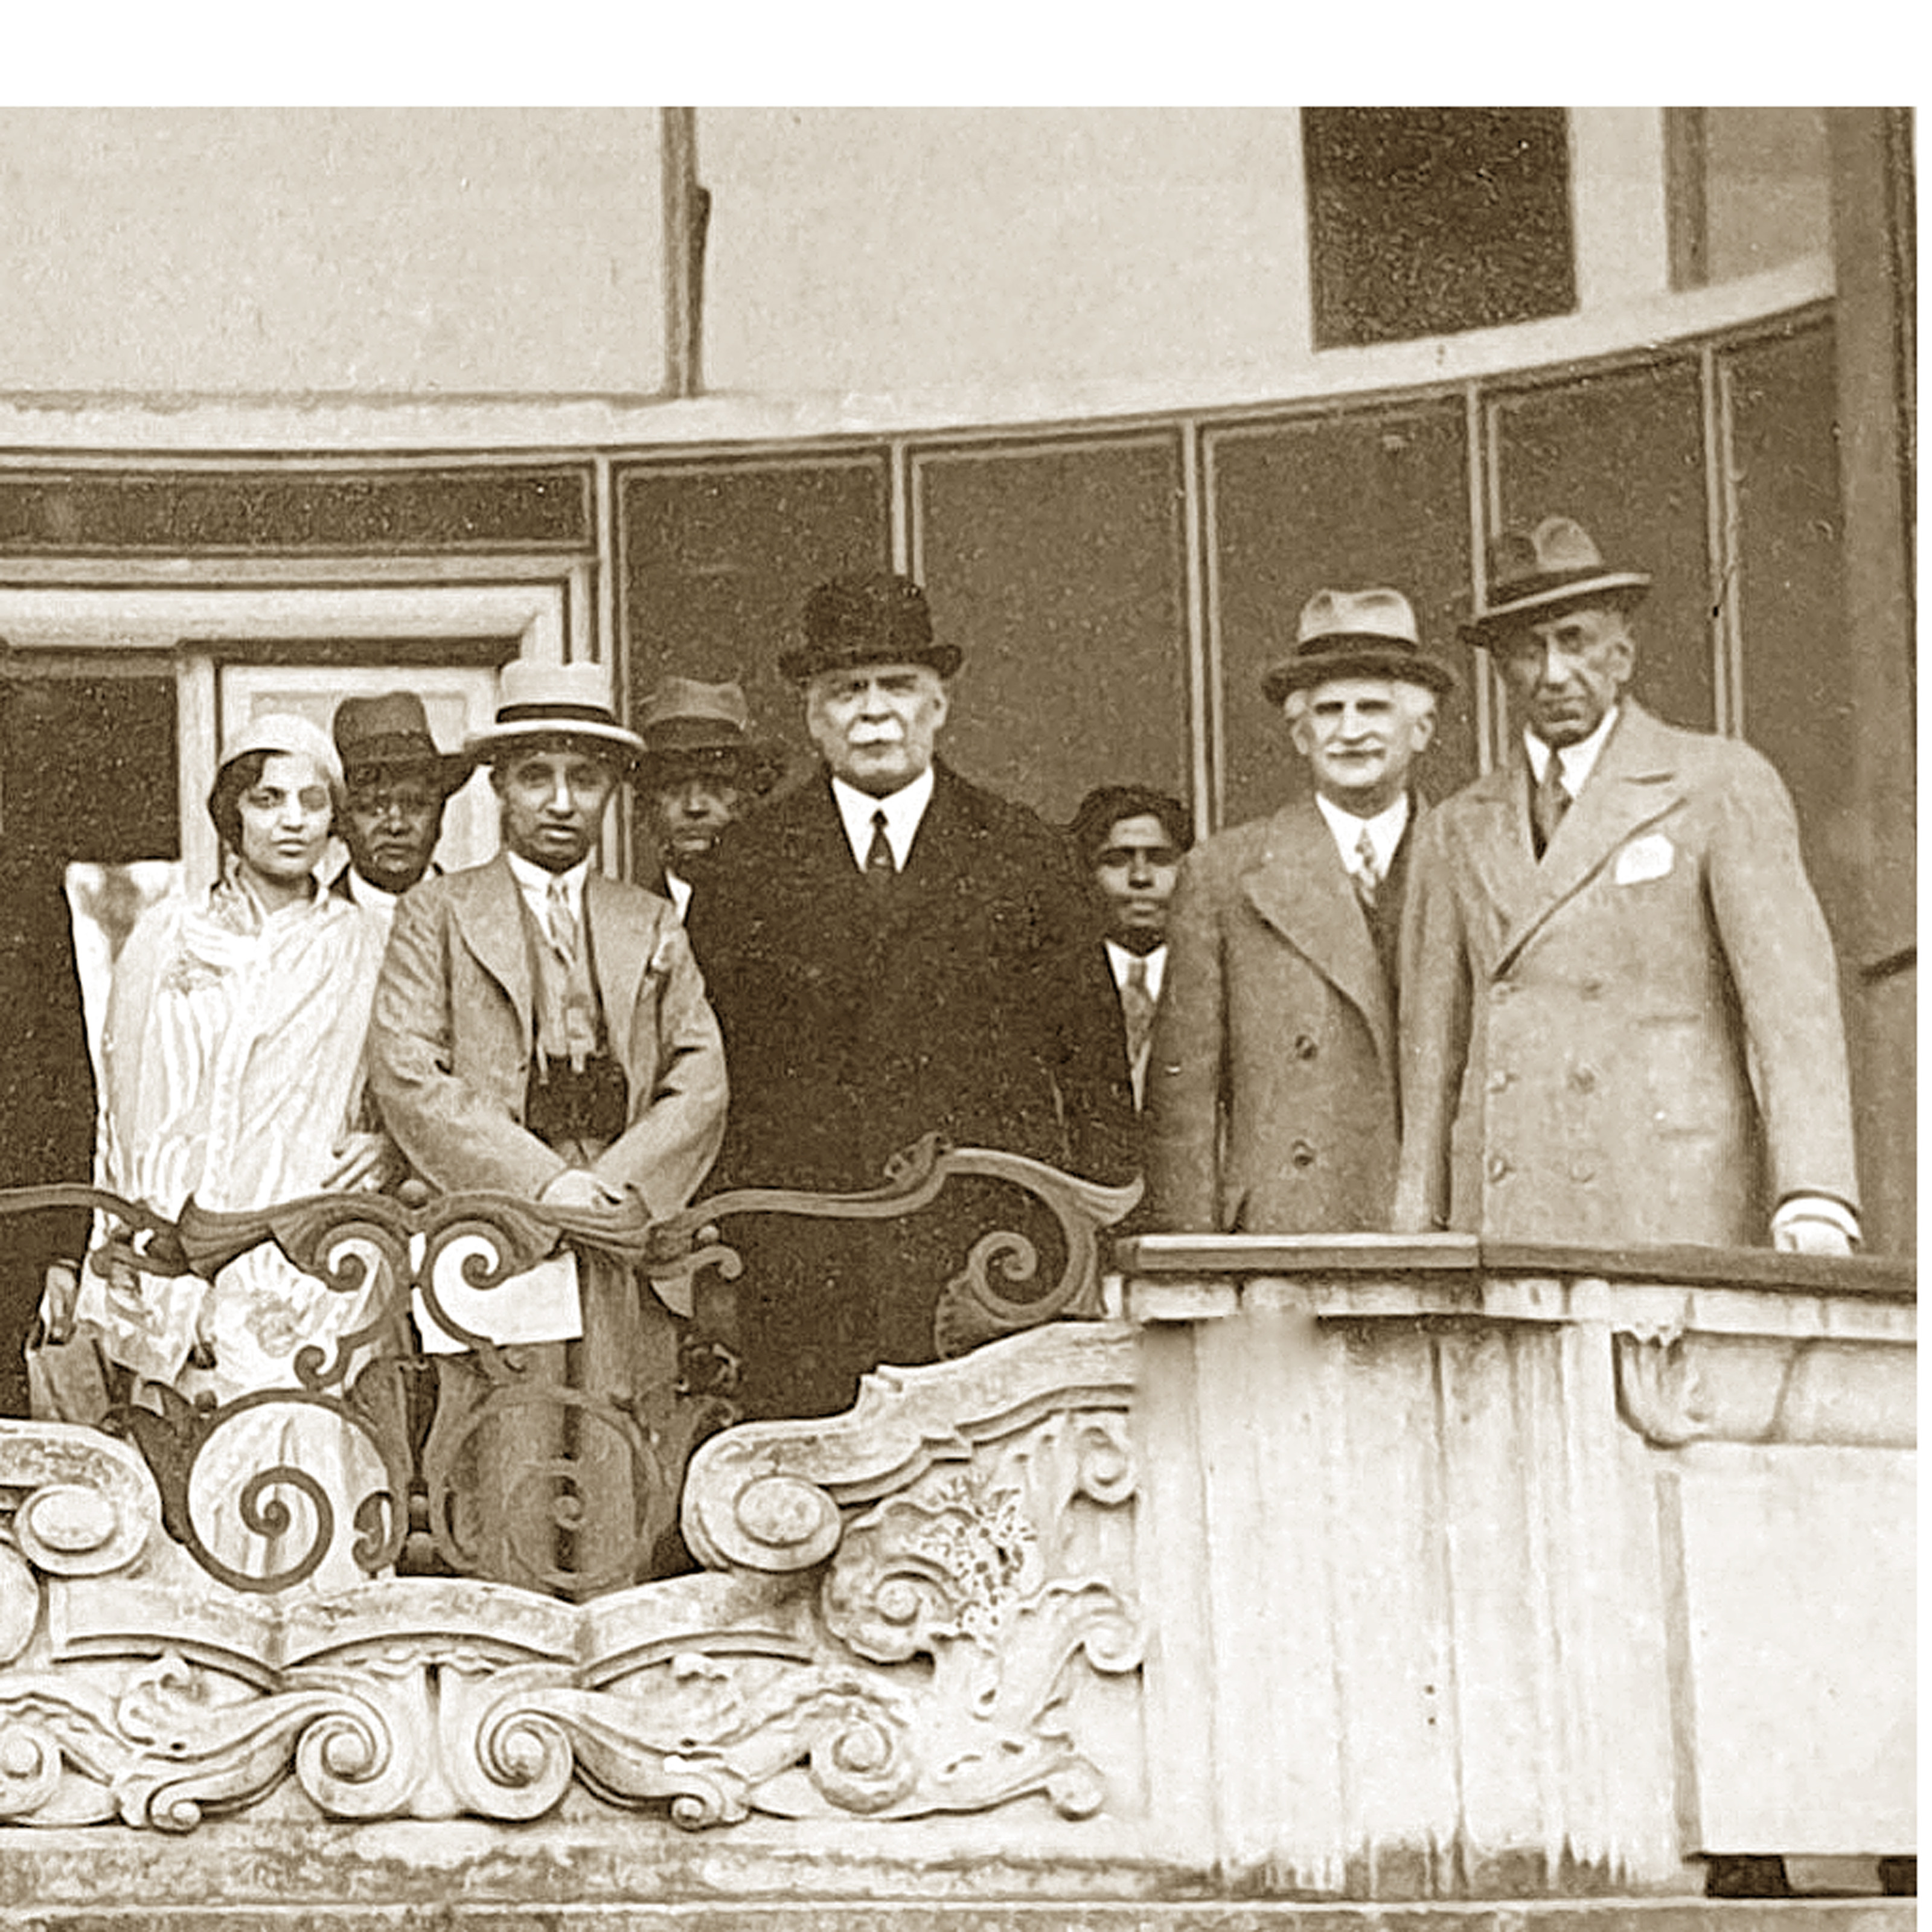 Sir Samad in Vienna with his oldest daughter and son-in-law, Nawab Raza Ali Khan during their tour of Europe in 1935.